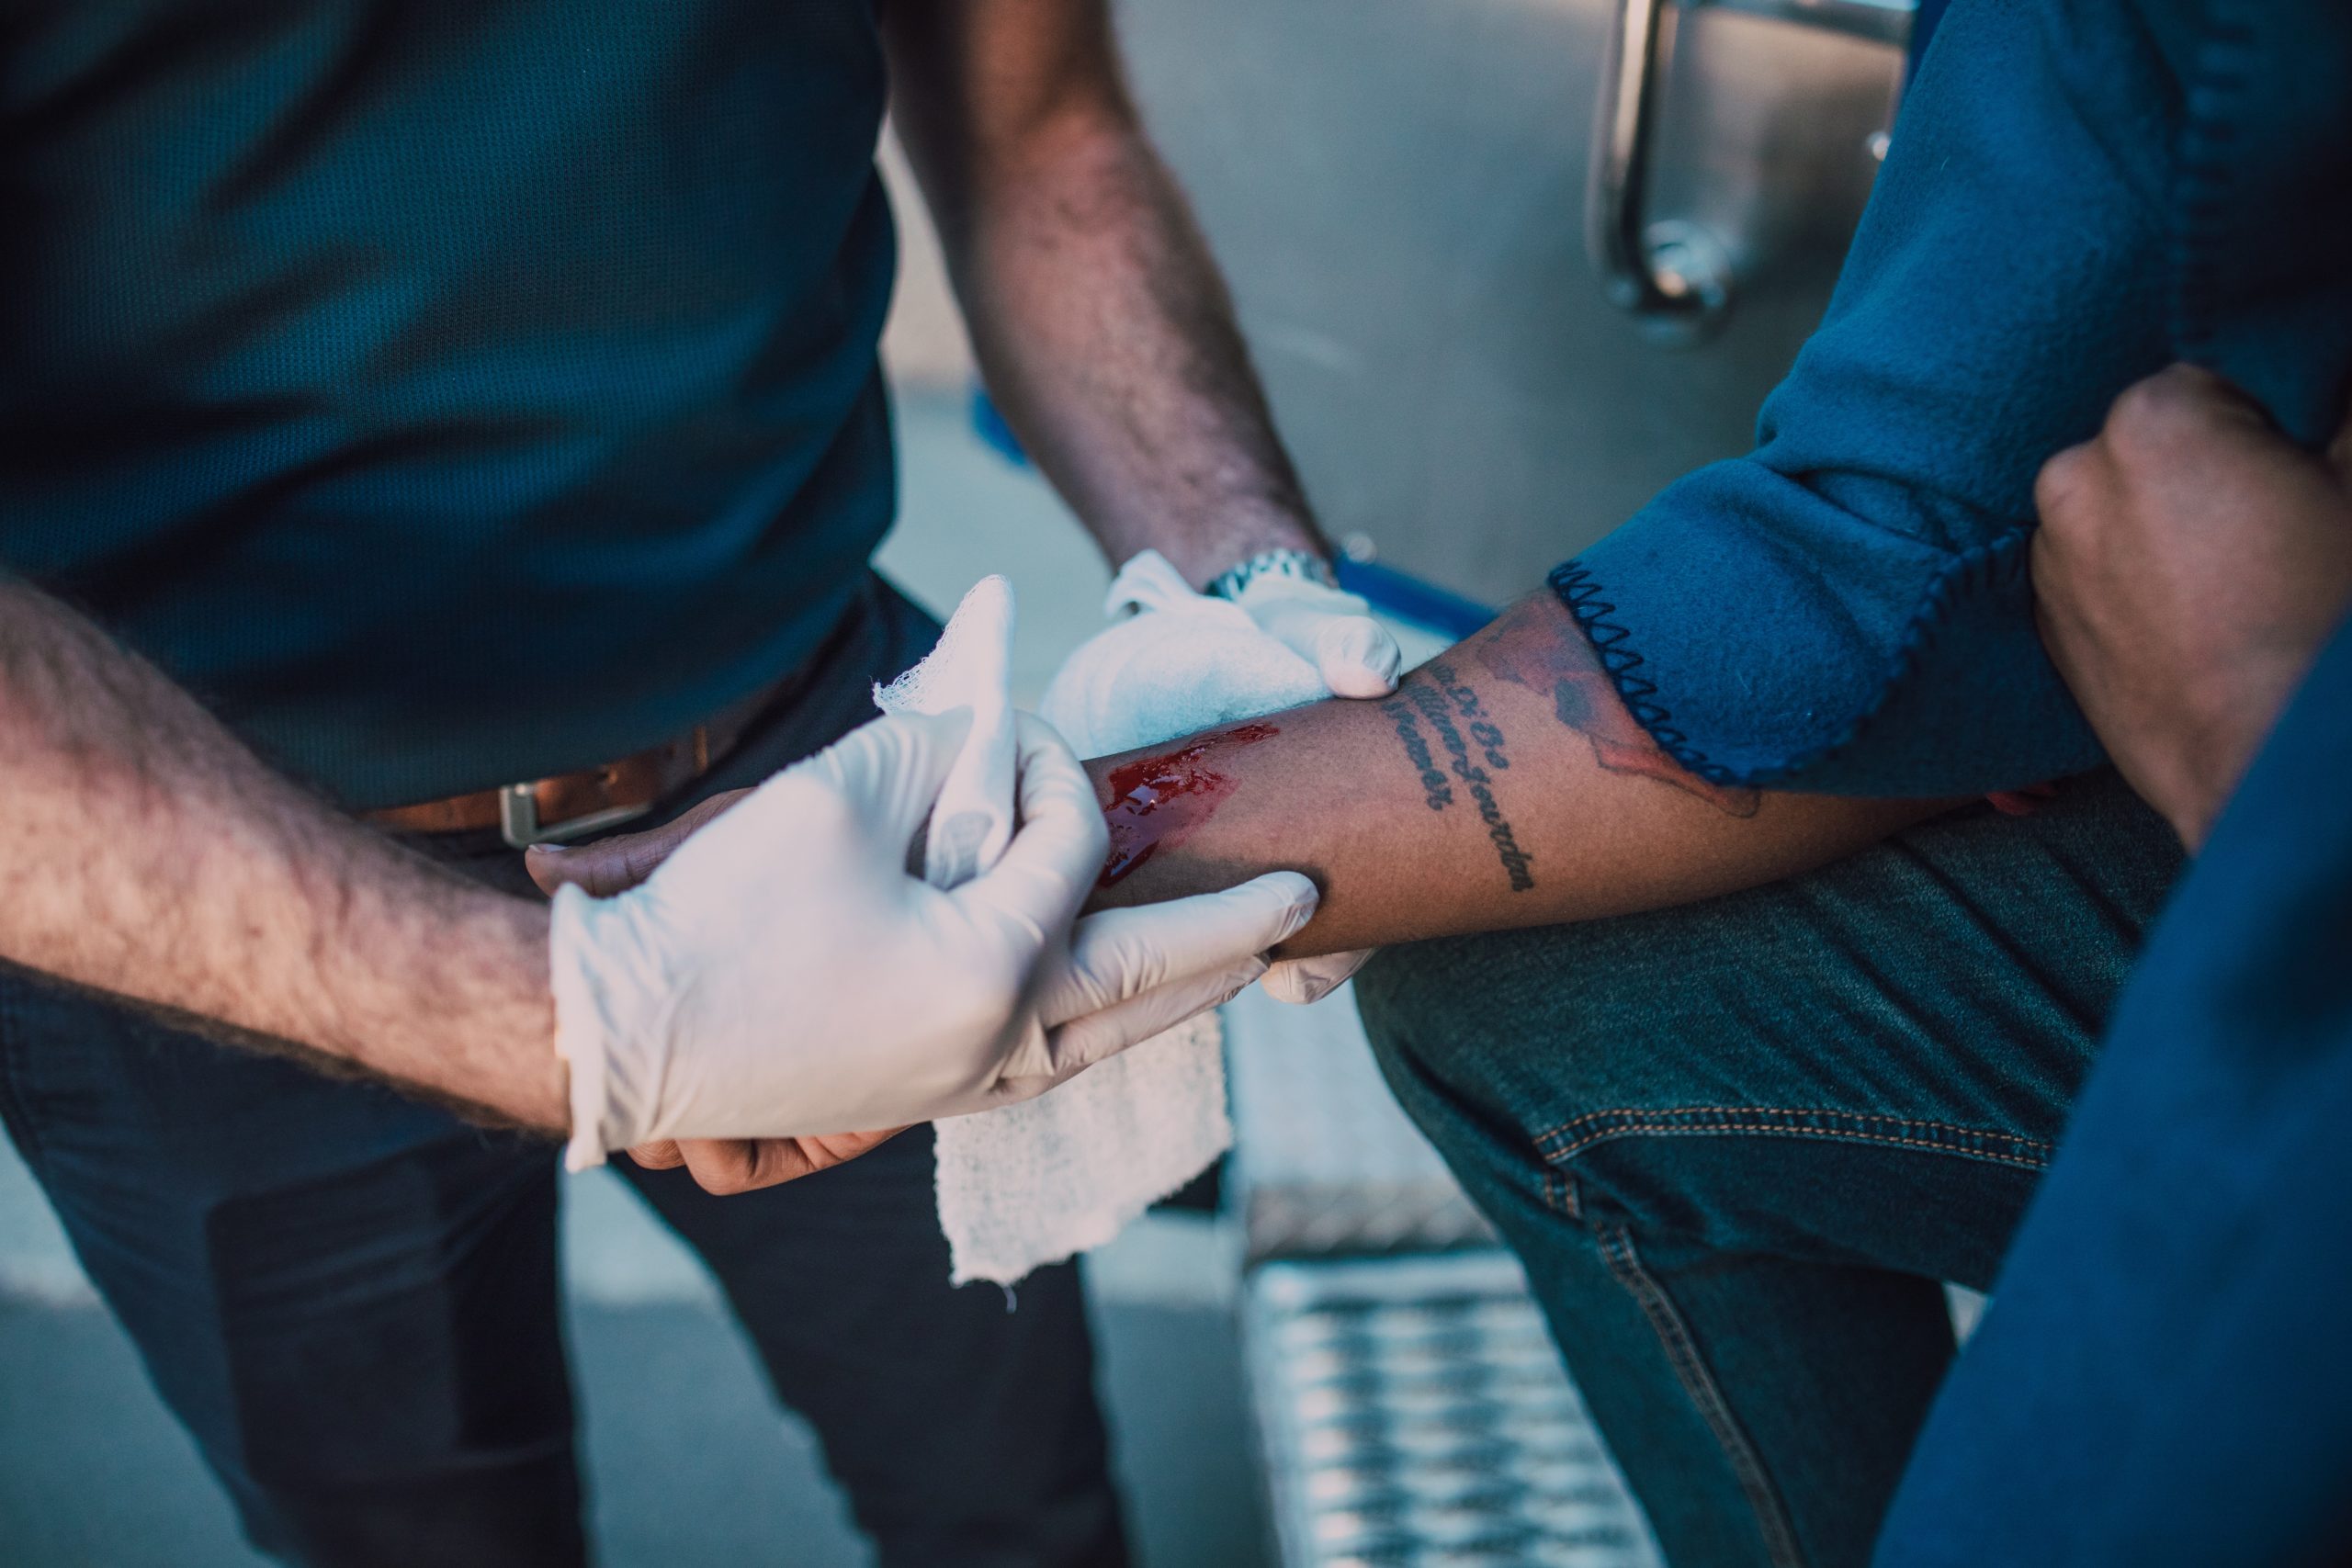 medical professional wrapping another person's arm injury